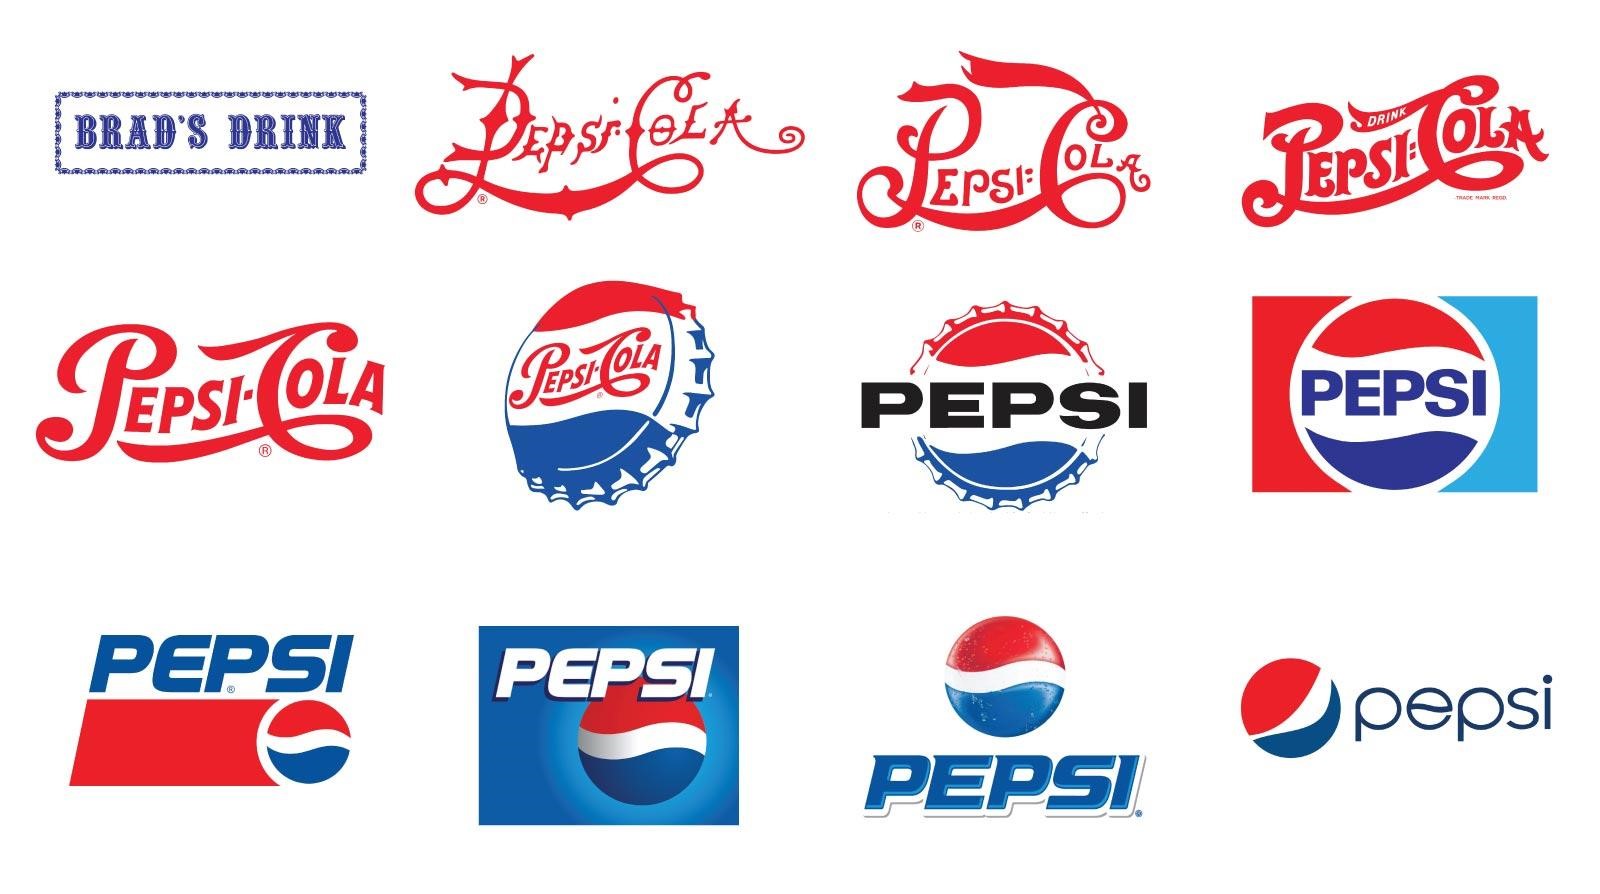 Logo Evolution: The Top 9 Famous Brands over the Time